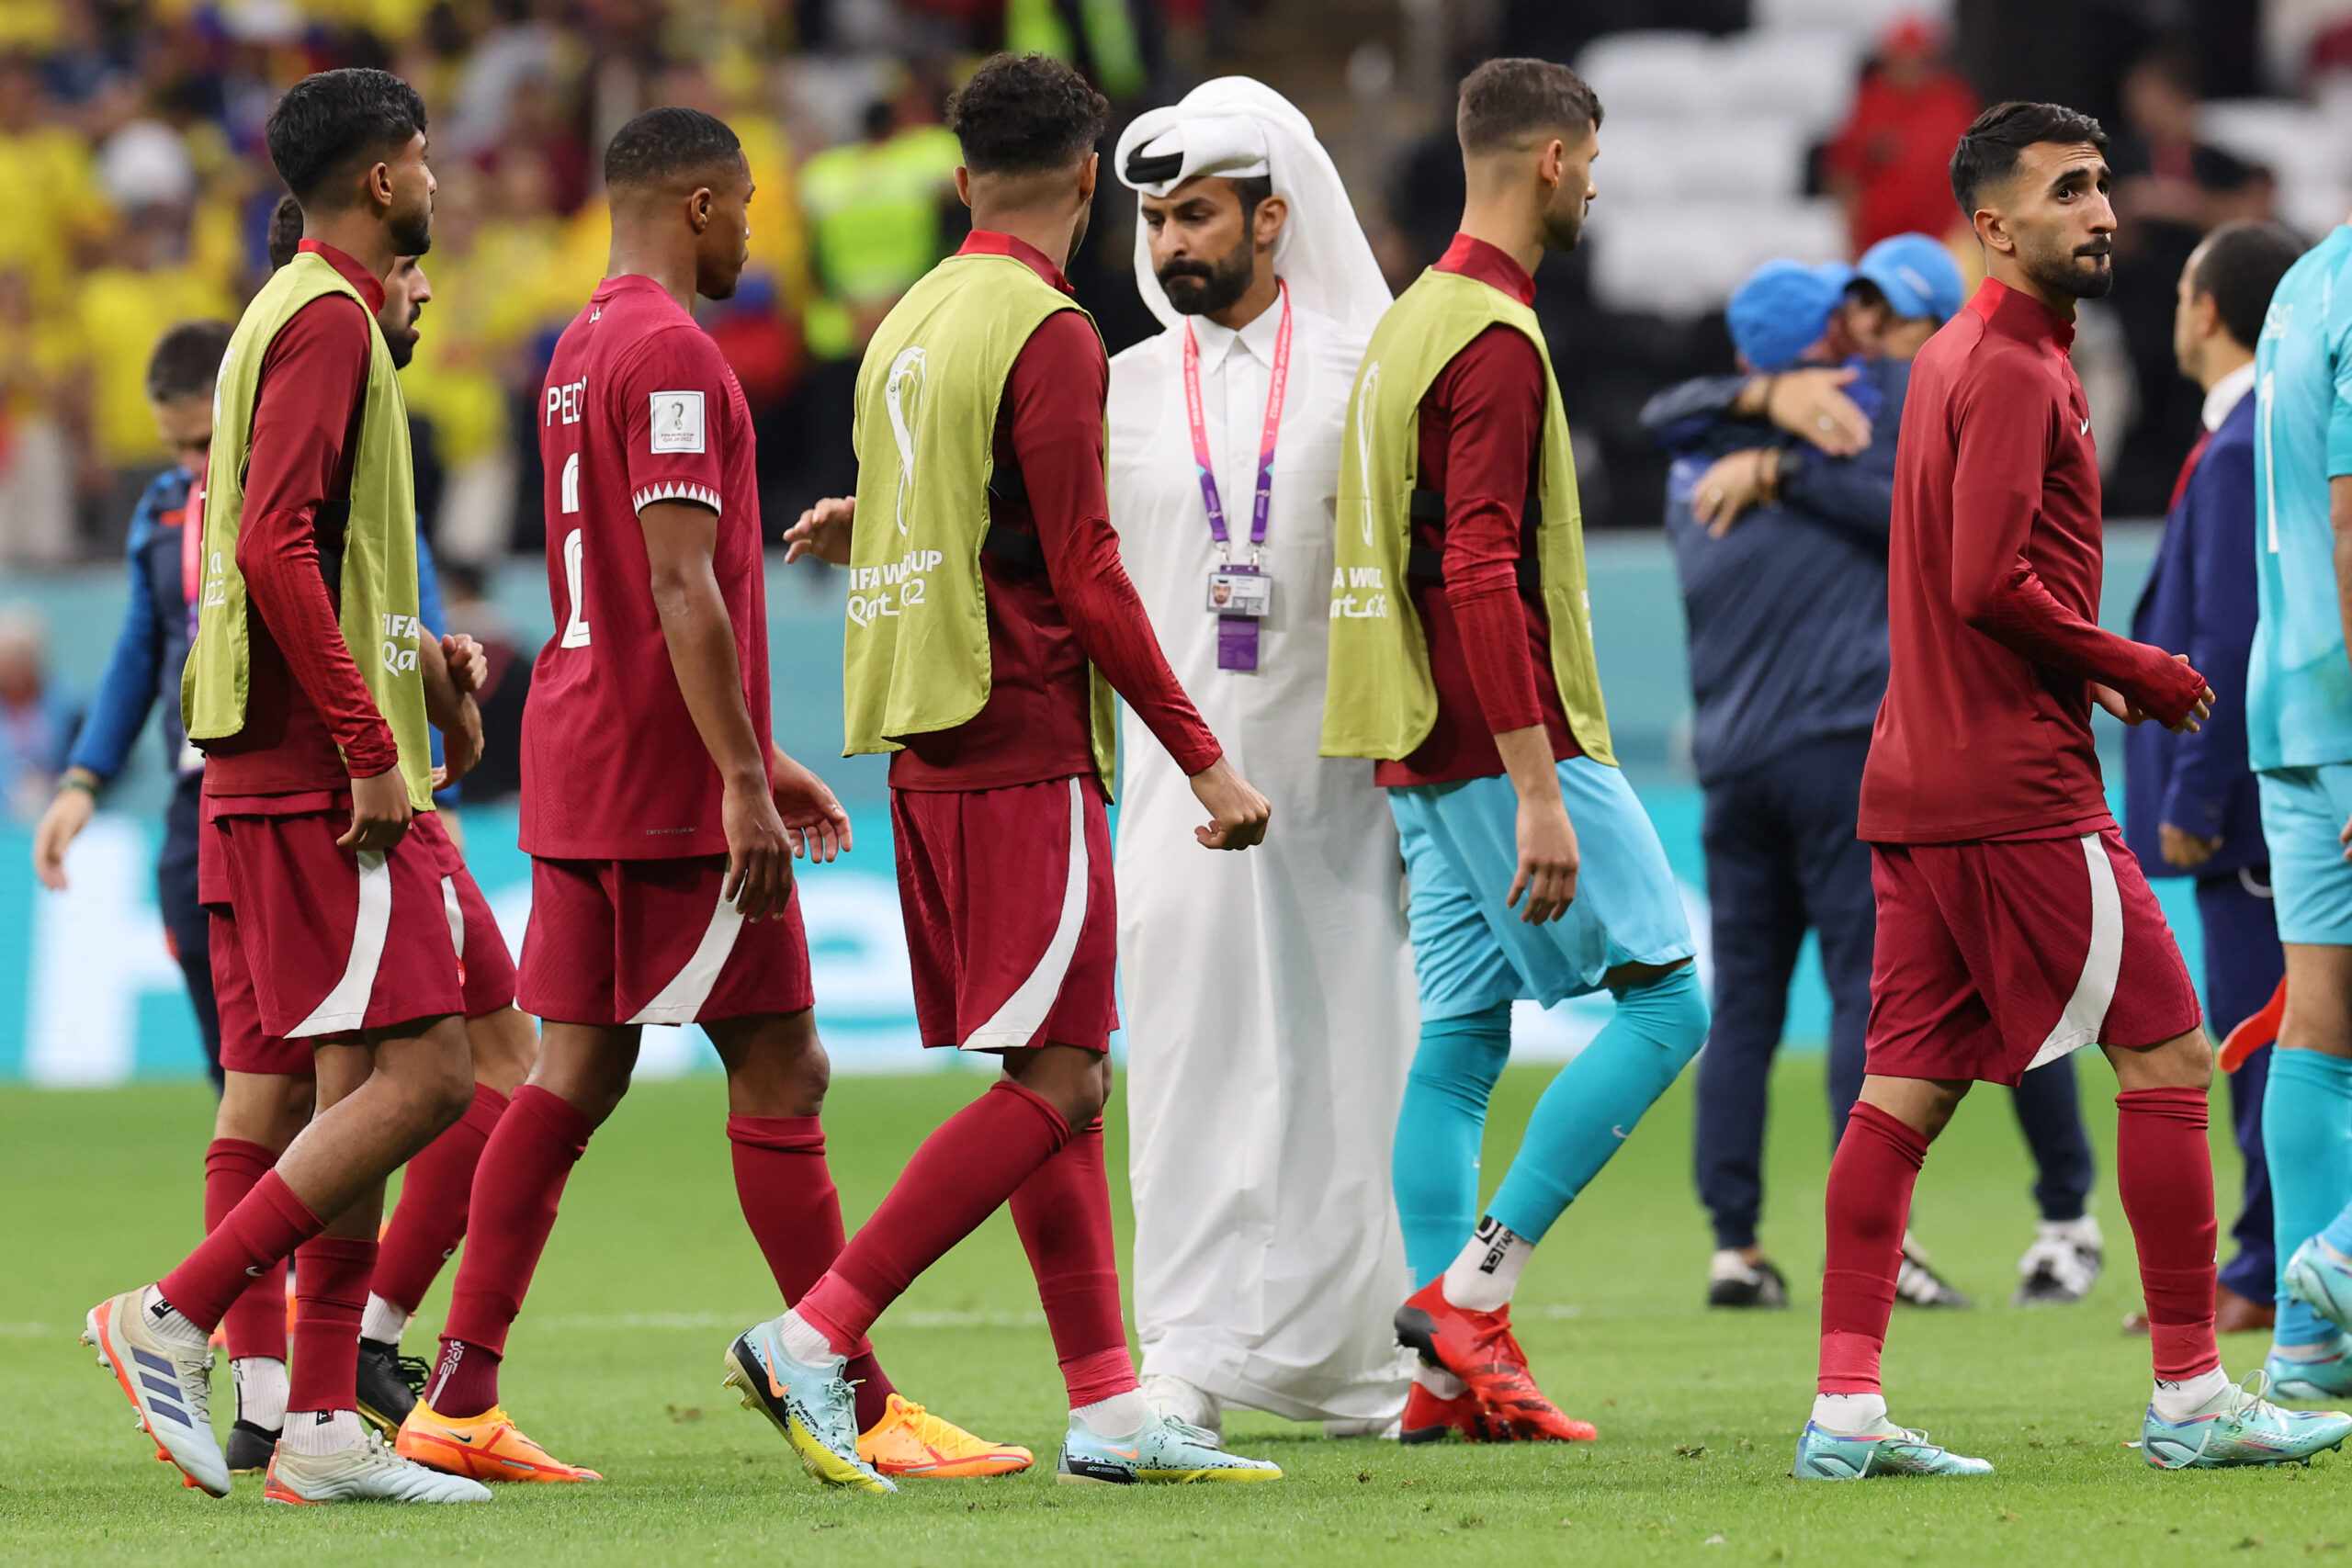 It wasn't a memorable maiden foray into the World Cup finals for 2022 host nation Qatar as Ecuador eased past them 2-0 in a curtain-raising Group A fixture